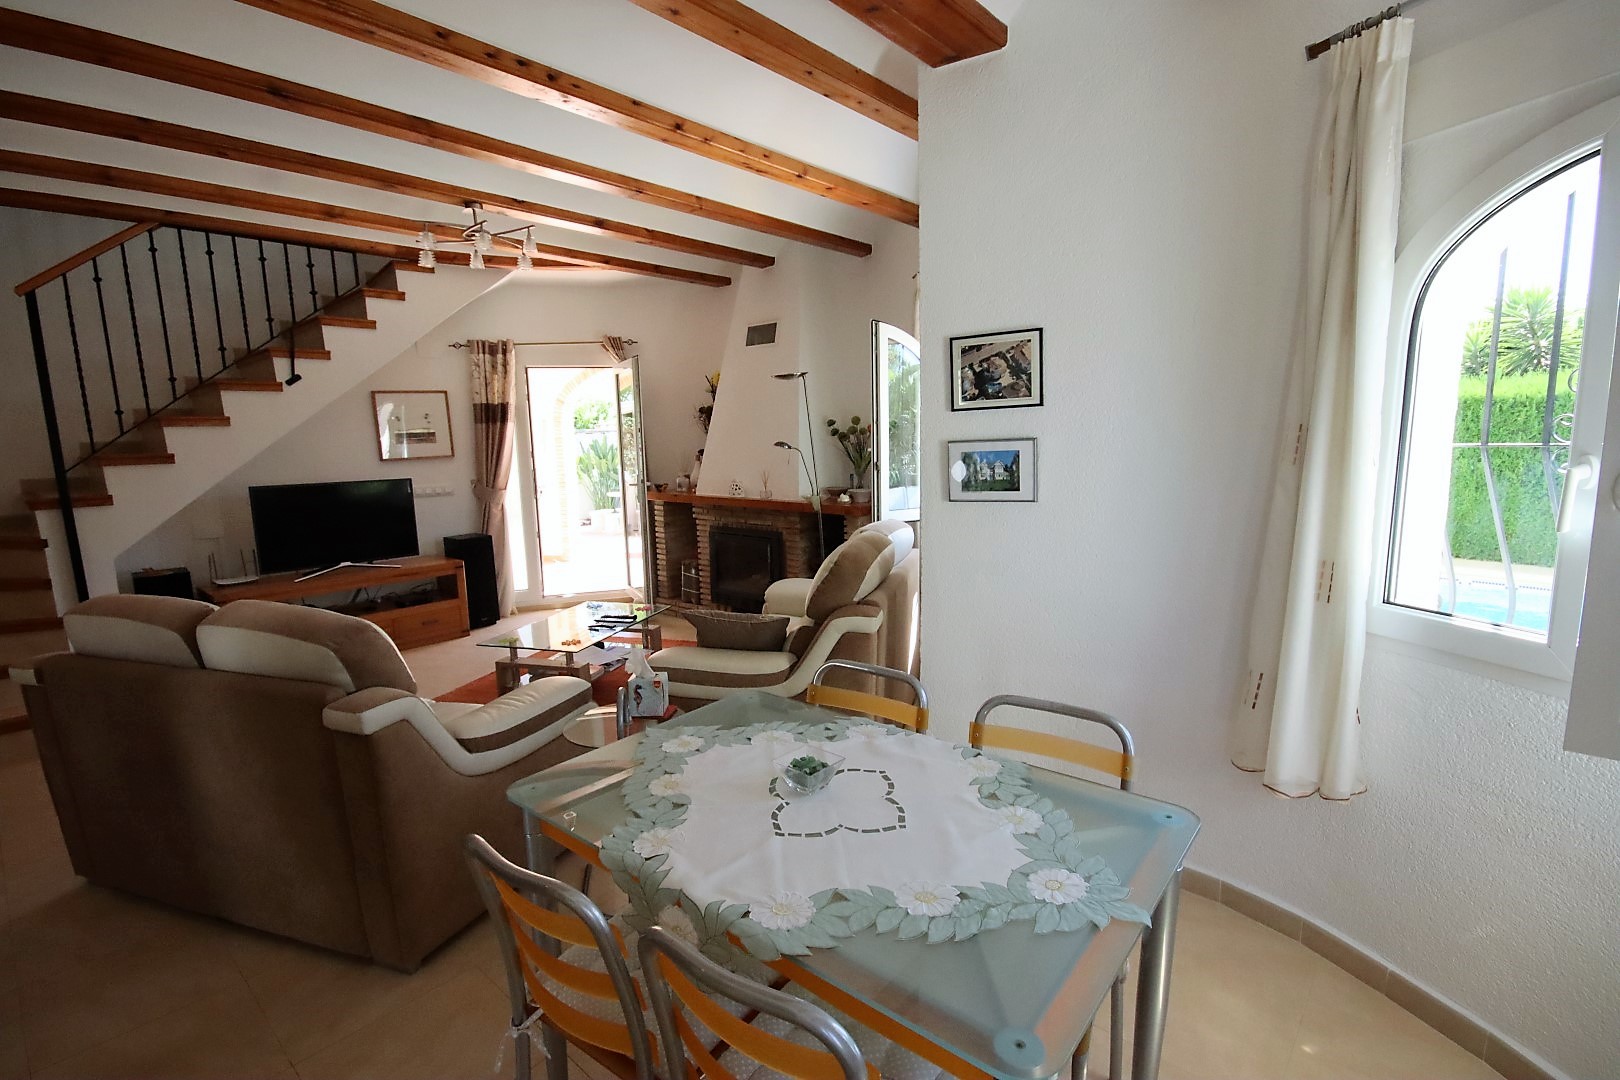 RESERVED Villa with 3 bedrooms and pool, Els Poblets Denia